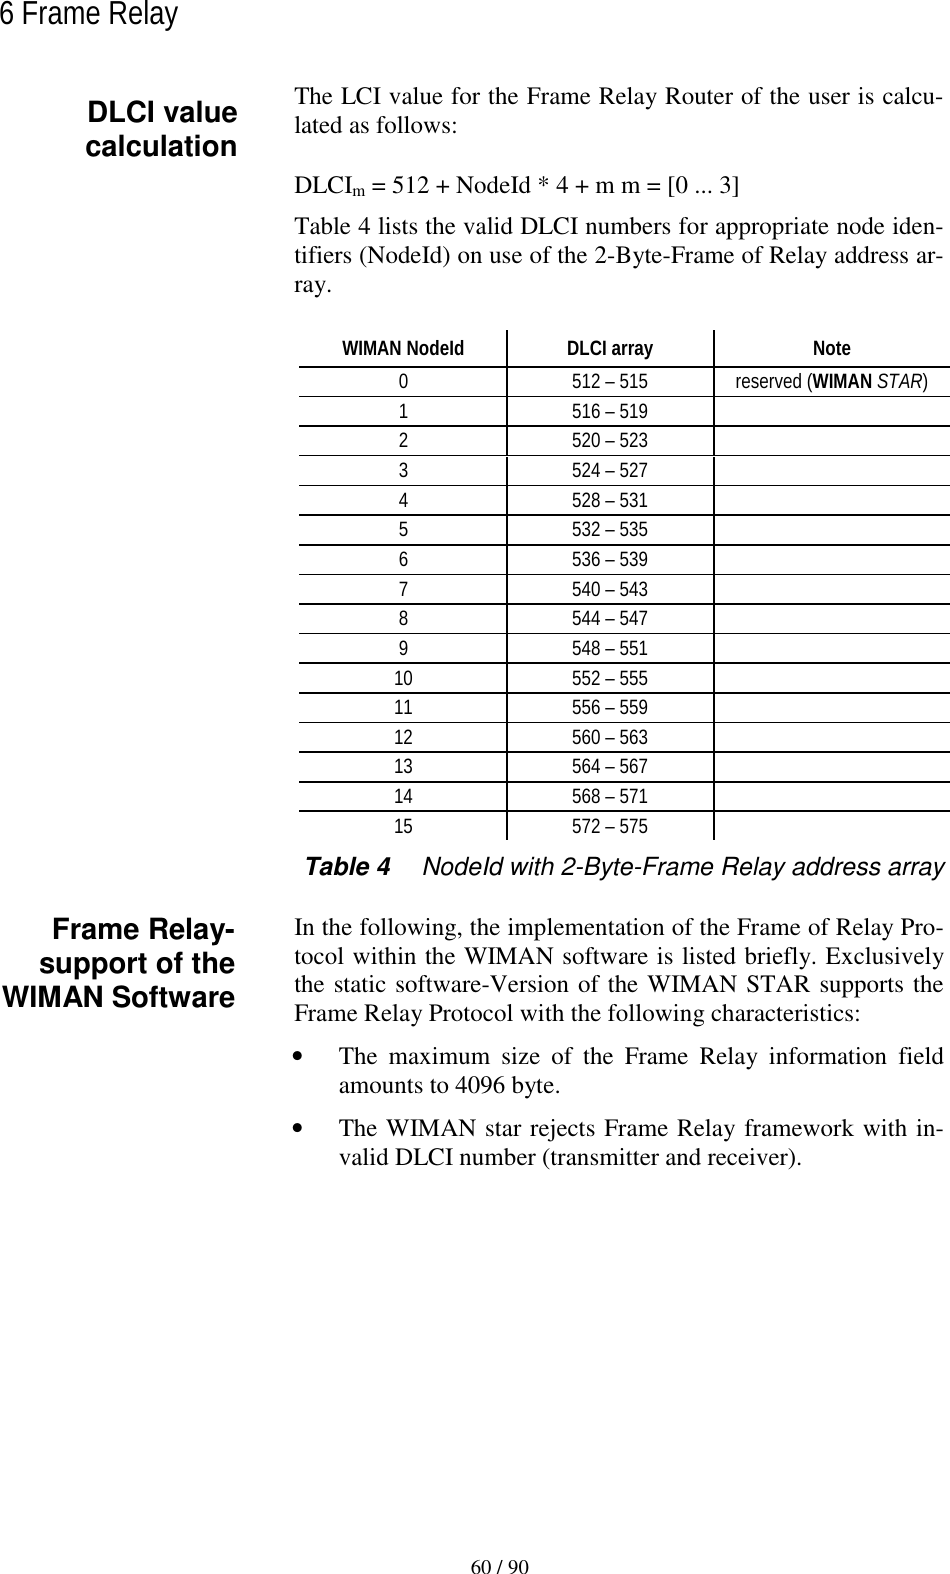   60 / 90 6 Frame Relay  The LCI value for the Frame Relay Router of the user is calcu-lated as follows: DLCIm = 512 + NodeId * 4 + m m = [0 ... 3] Table 4 lists the valid DLCI numbers for appropriate node iden-tifiers (NodeId) on use of the 2-Byte-Frame of Relay address ar-ray. WIMAN NodeId  DLCI array  Note 0  512 – 515  reserved (WIMAN STAR) 1  516 – 519   2  520 – 523   3  524 – 527   4  528 – 531   5  532 – 535   6  536 – 539   7  540 – 543   8  544 – 547   9  548 – 551   10  552 – 555   11  556 – 559   12  560 – 563   13  564 – 567   14  568 – 571   15  572 – 575   Table 4  NodeId with 2-Byte-Frame Relay address array In the following, the implementation of the Frame of Relay Pro-tocol within the WIMAN software is listed briefly. Exclusively the static software-Version of the WIMAN STAR supports the Frame Relay Protocol with the following characteristics: •  The maximum size of the Frame Relay information field amounts to 4096 byte. •  The WIMAN star rejects Frame Relay framework with in-valid DLCI number (transmitter and receiver). DLCI value calculation Frame Relay-support of the WIMAN Software 